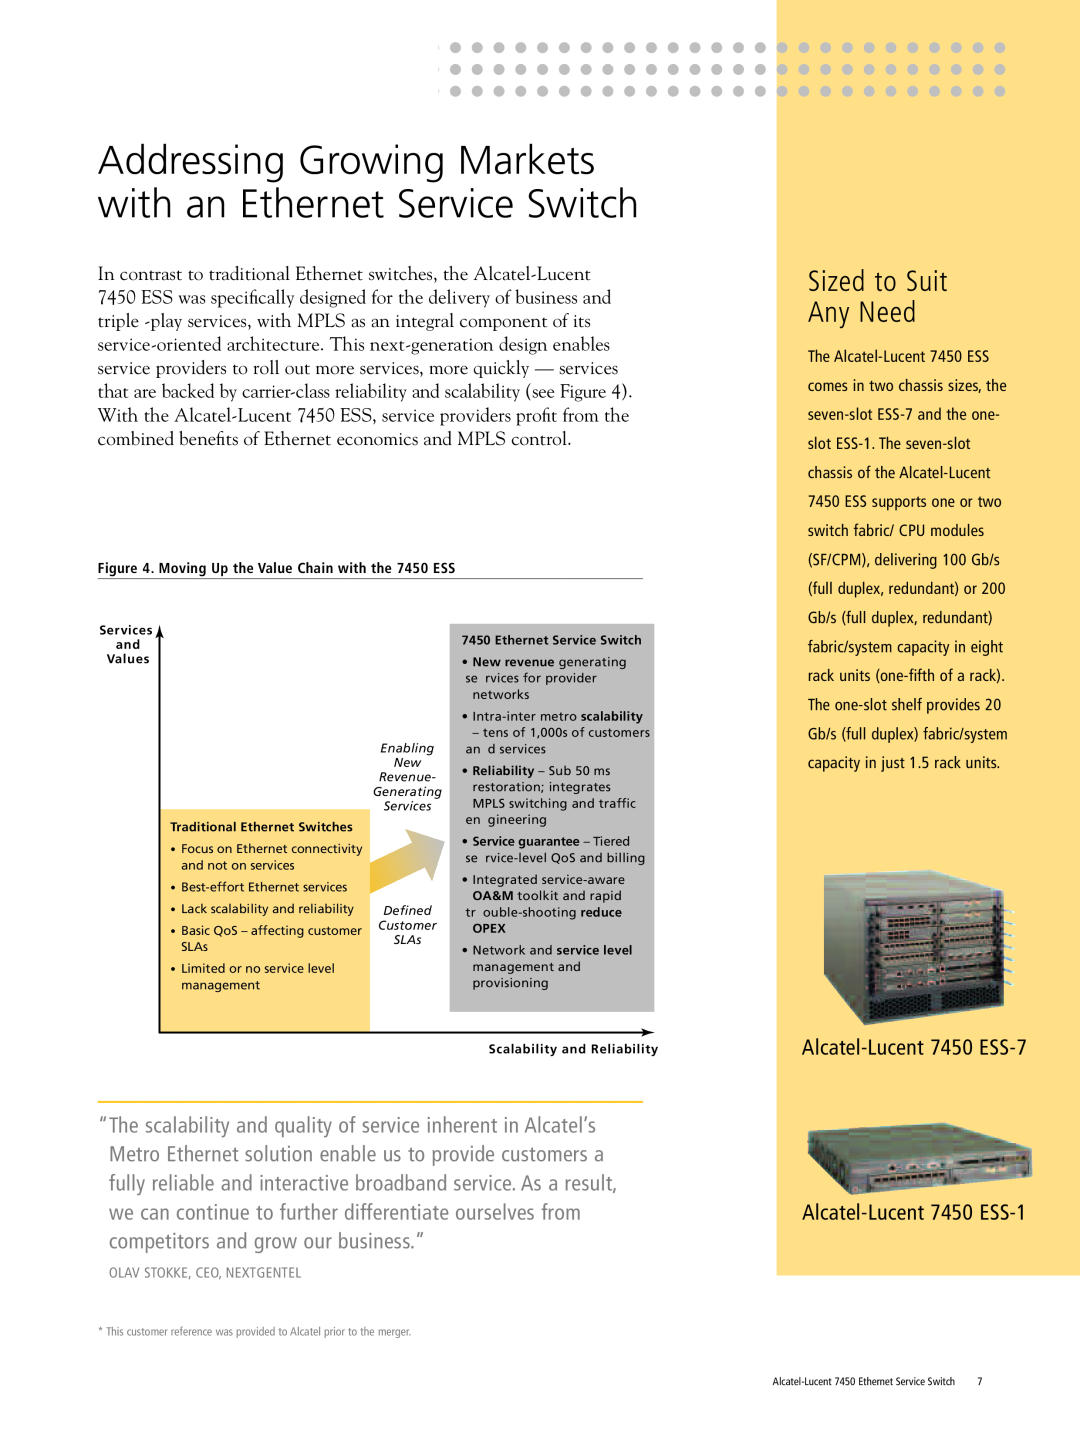 Riverstone Networks 7450 manual Addressing Growing Markets with an Ethernet Service Switch, Sized to Suit Any Need, Deﬁned 